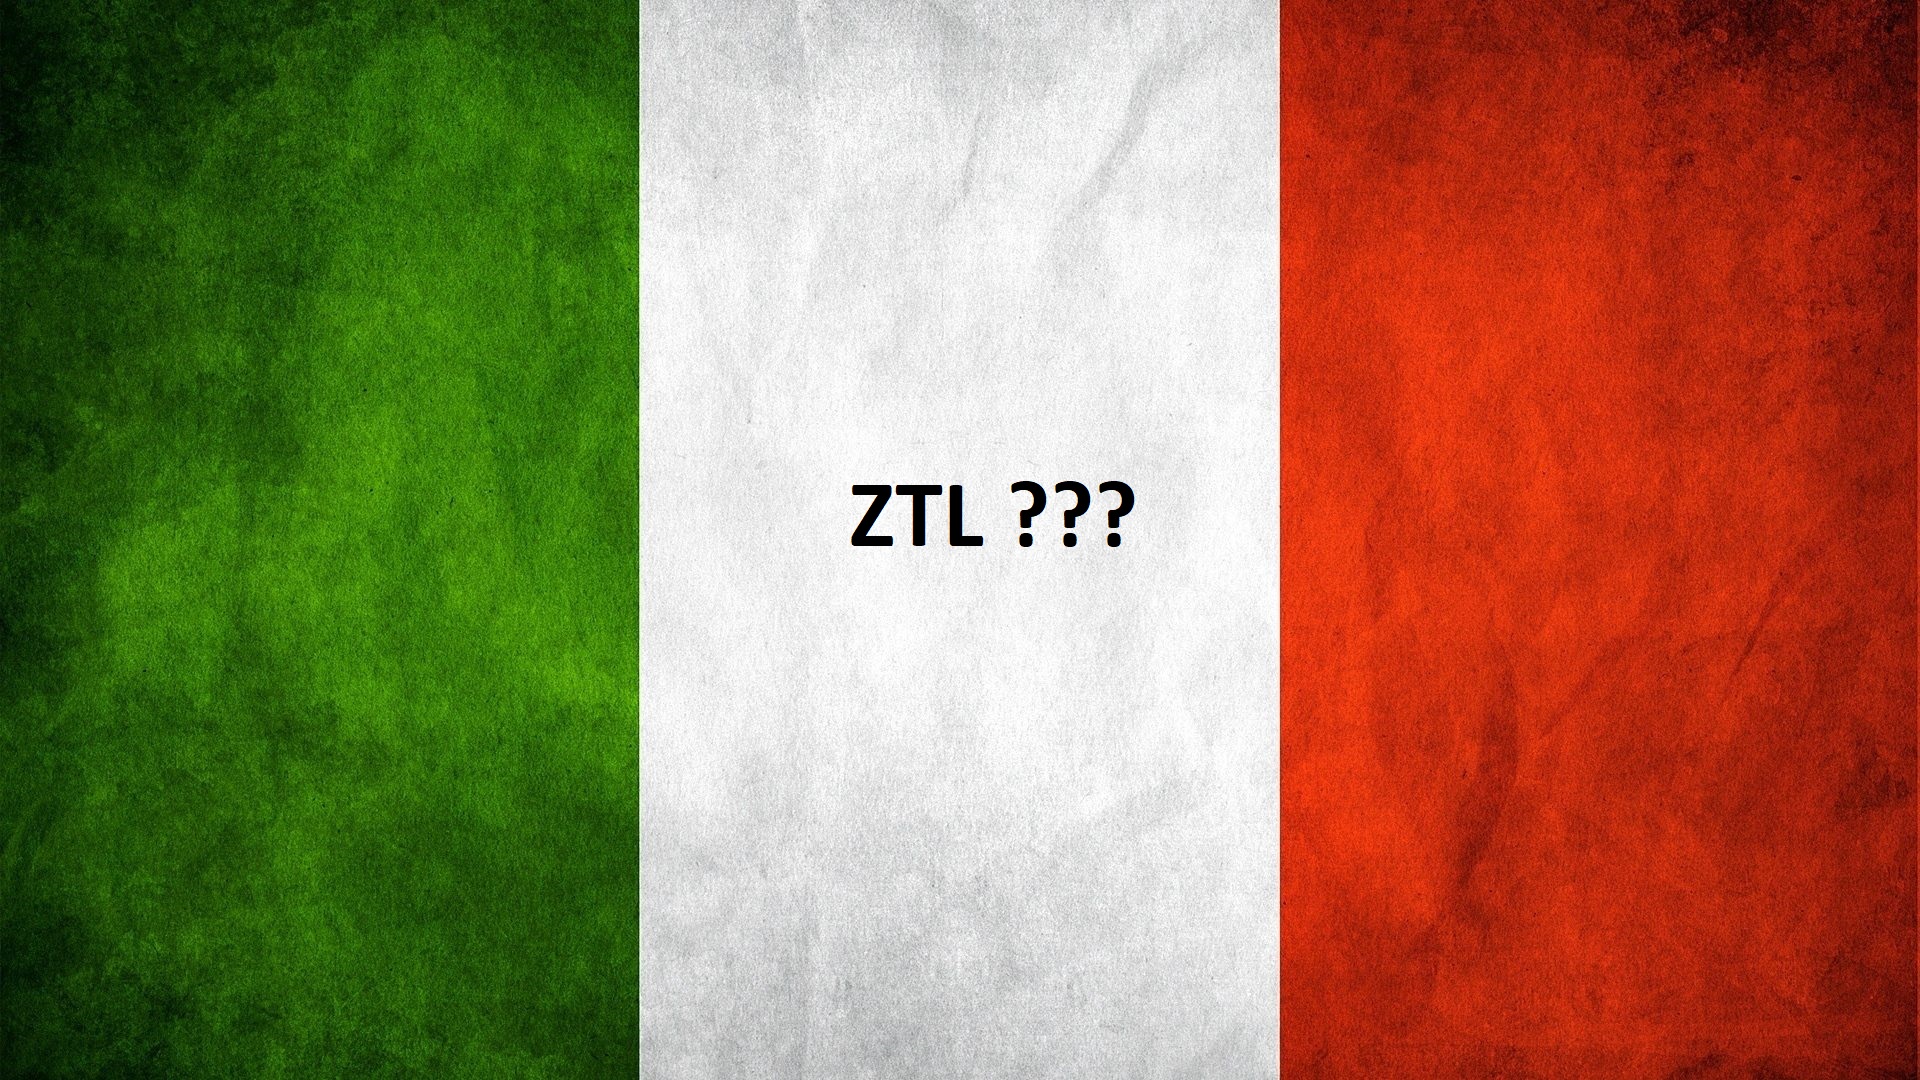 An Italian flag with ZTL and question marks, Italy on Motorbike tries to answer the question